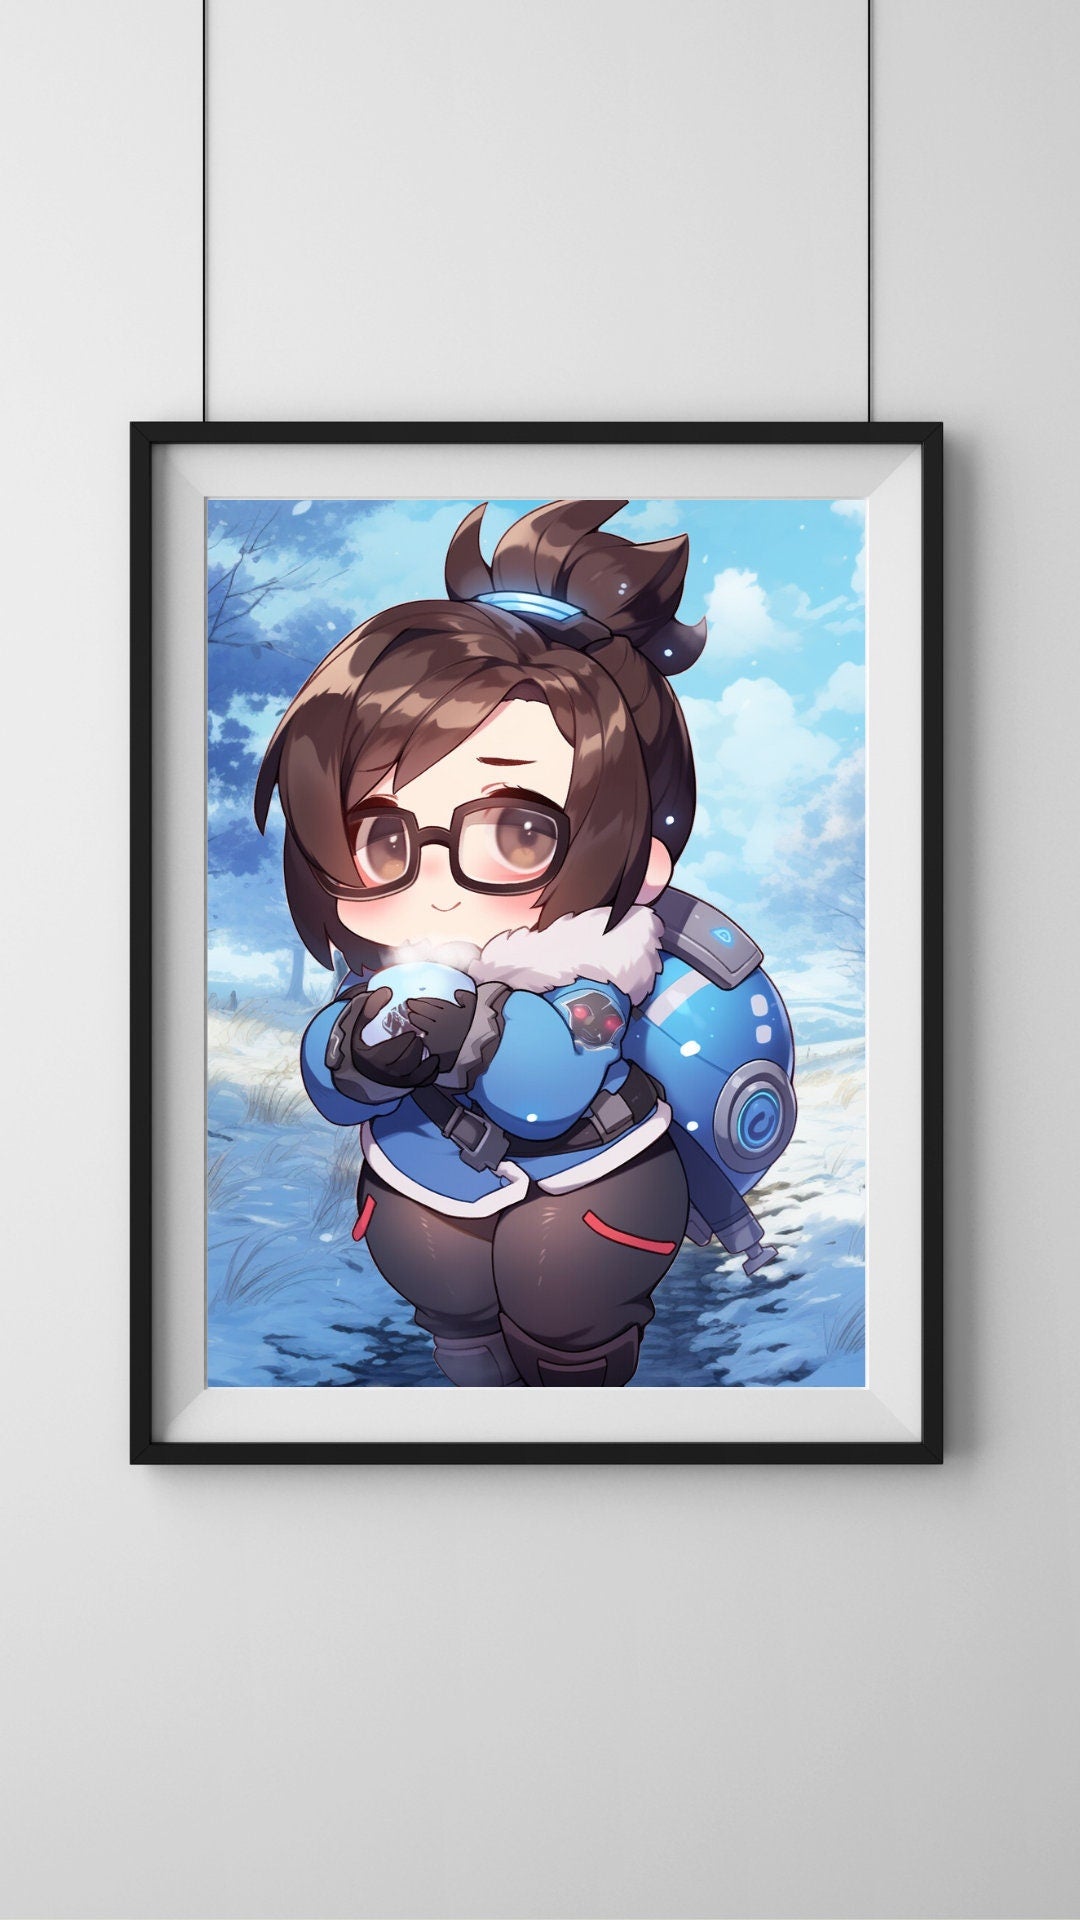 Chilly Adventures: Adorable Chibi Character in Blue Parka Art Print